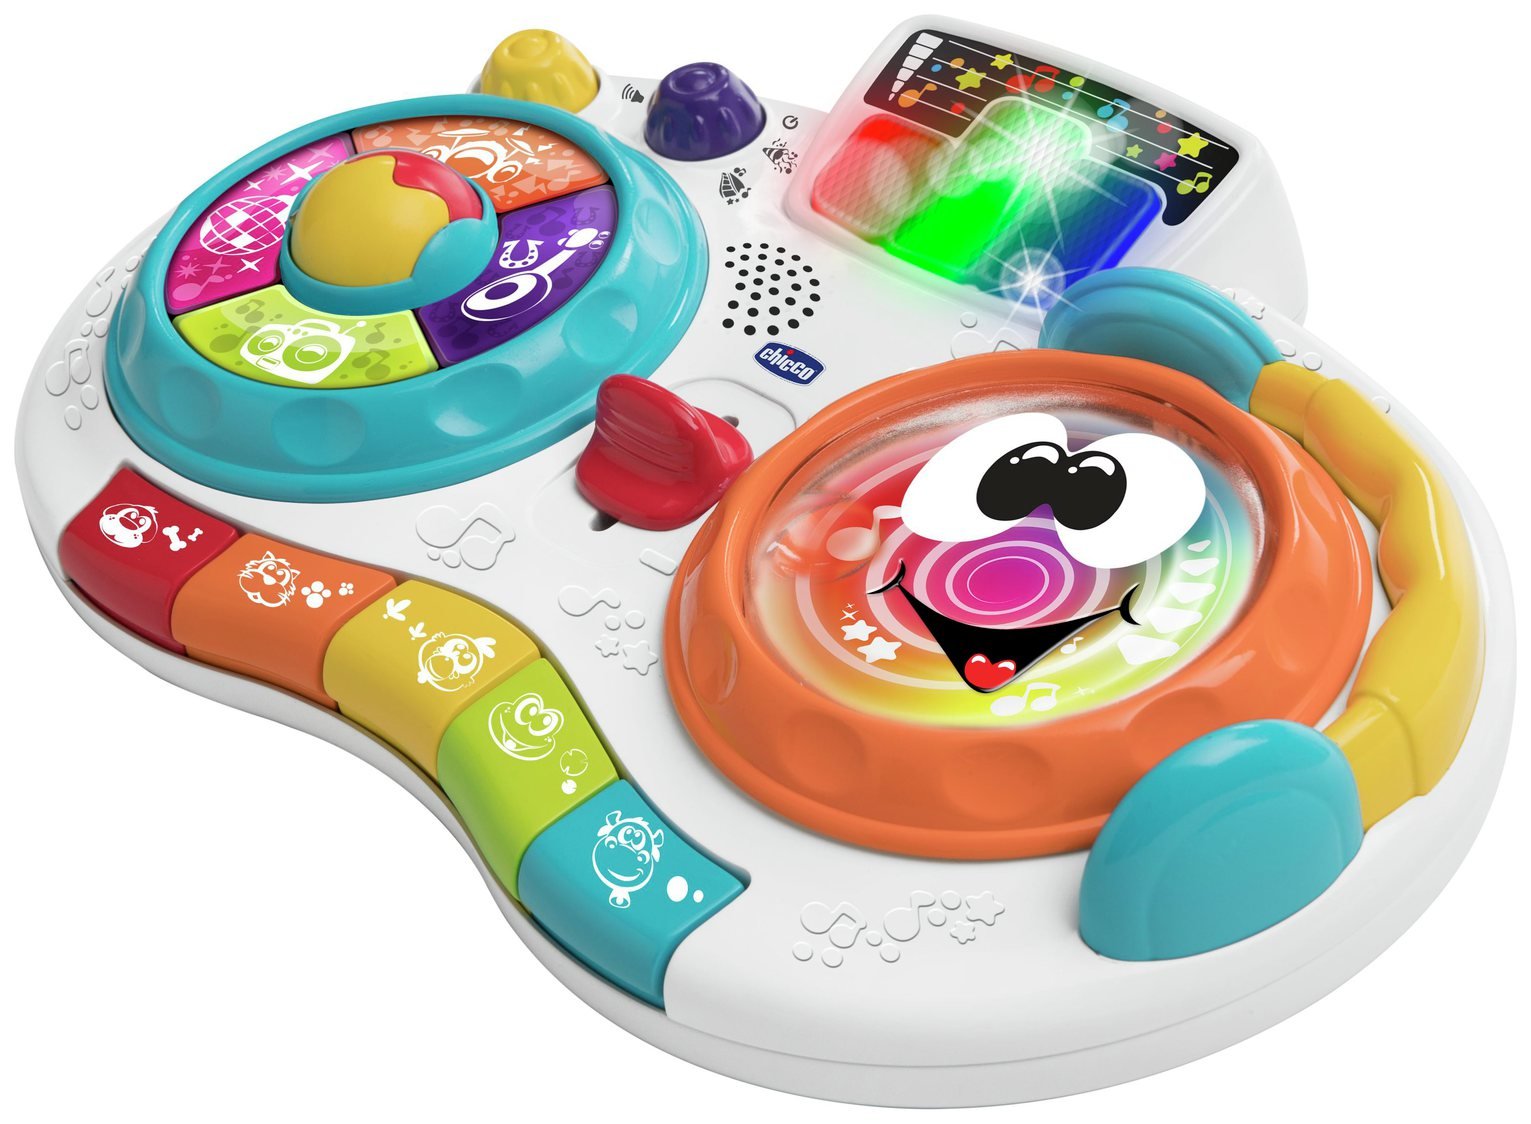 Chicco DJ Scratchy Musical Toy Review